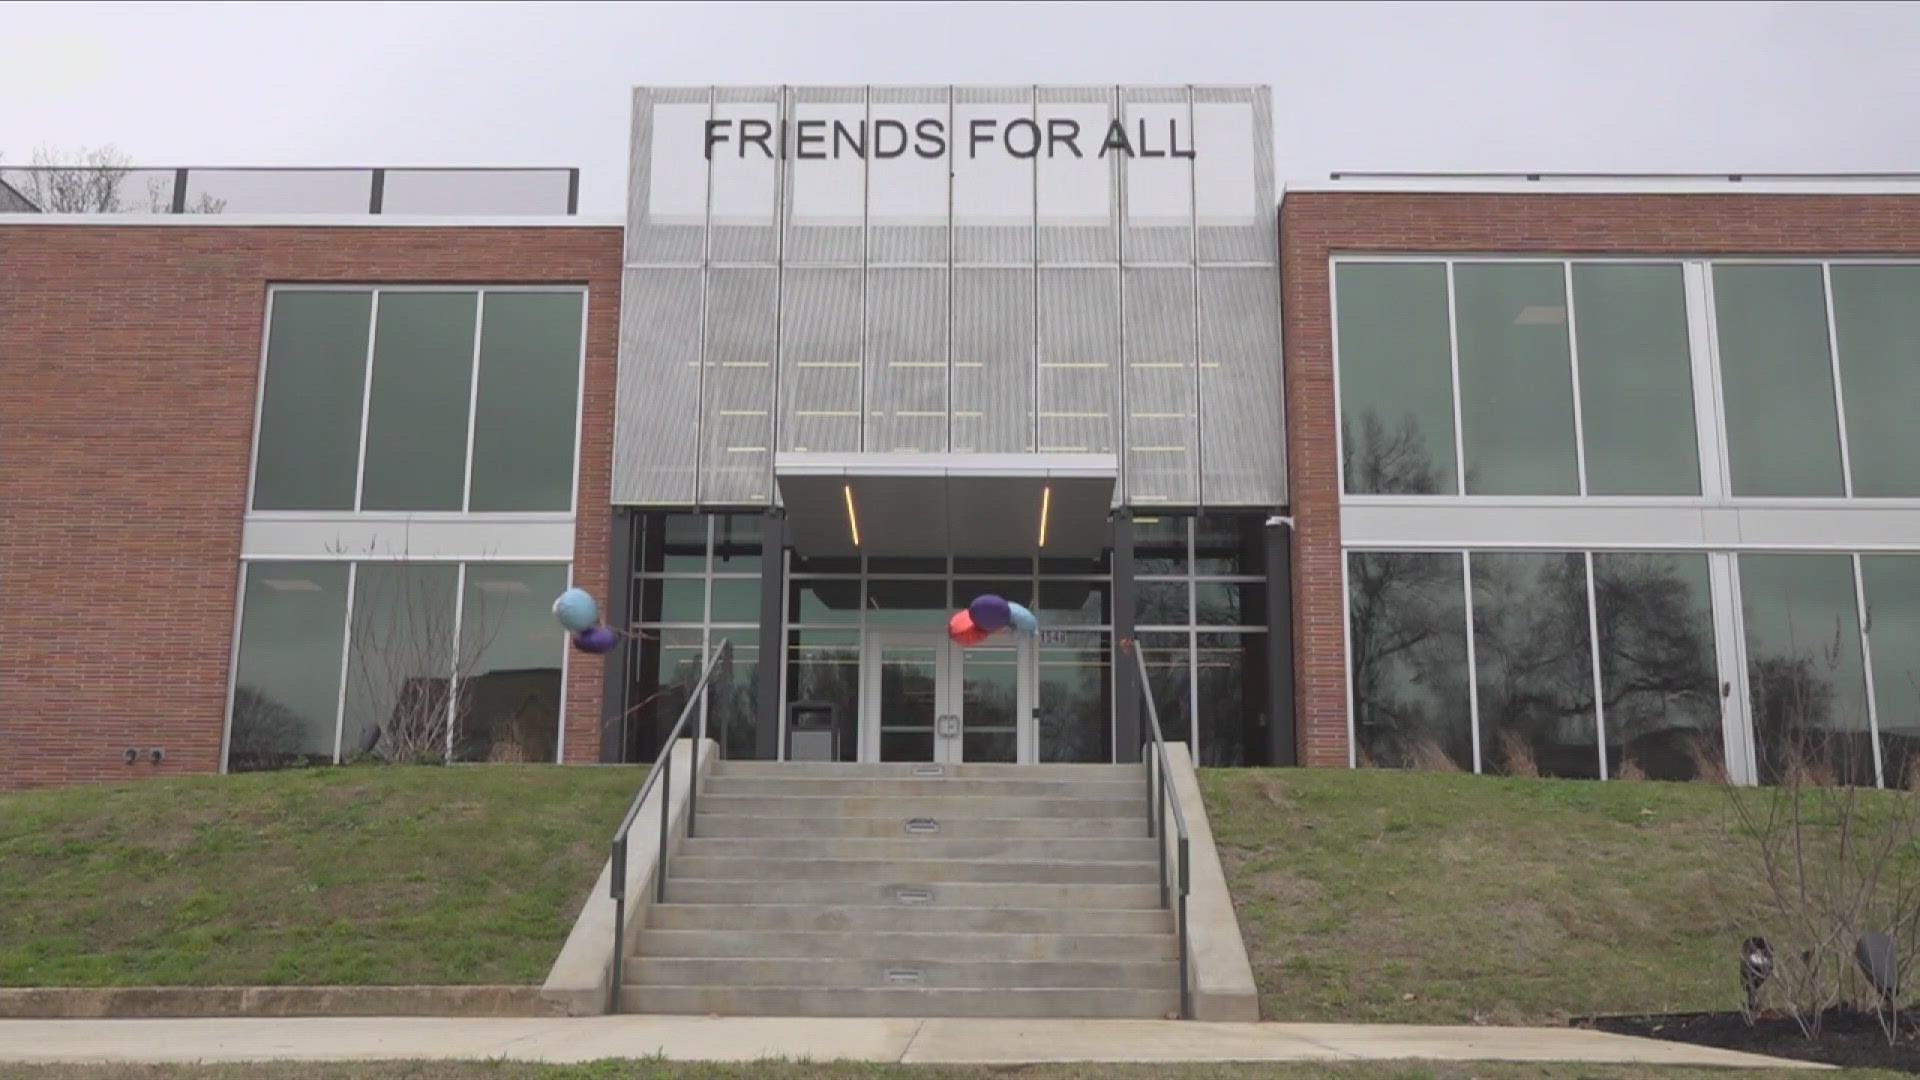 Formerly "Friends for Life," the organization works to prevent HIV and help those who live with it. The new building is focused on adding dignity to those in need.